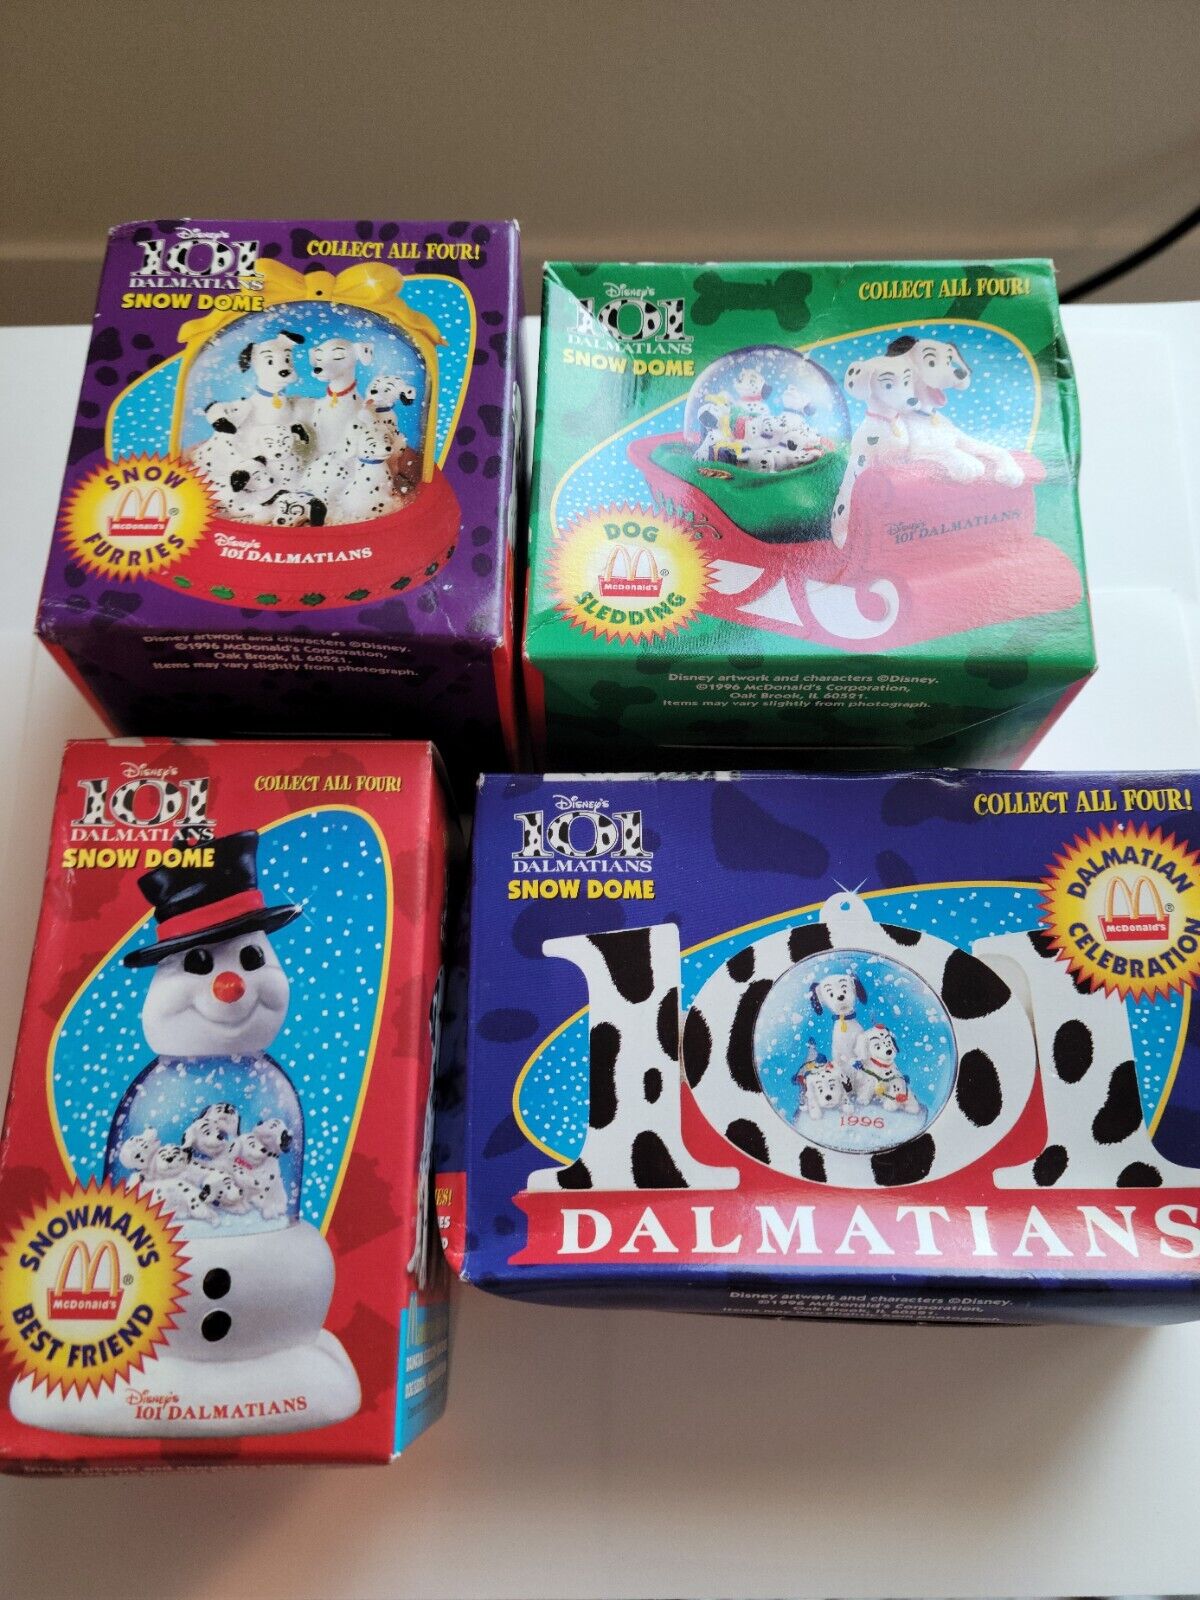 Disneys 101 Dalmations 1996 collectable Snow Domes, McDonalds, full set of 4